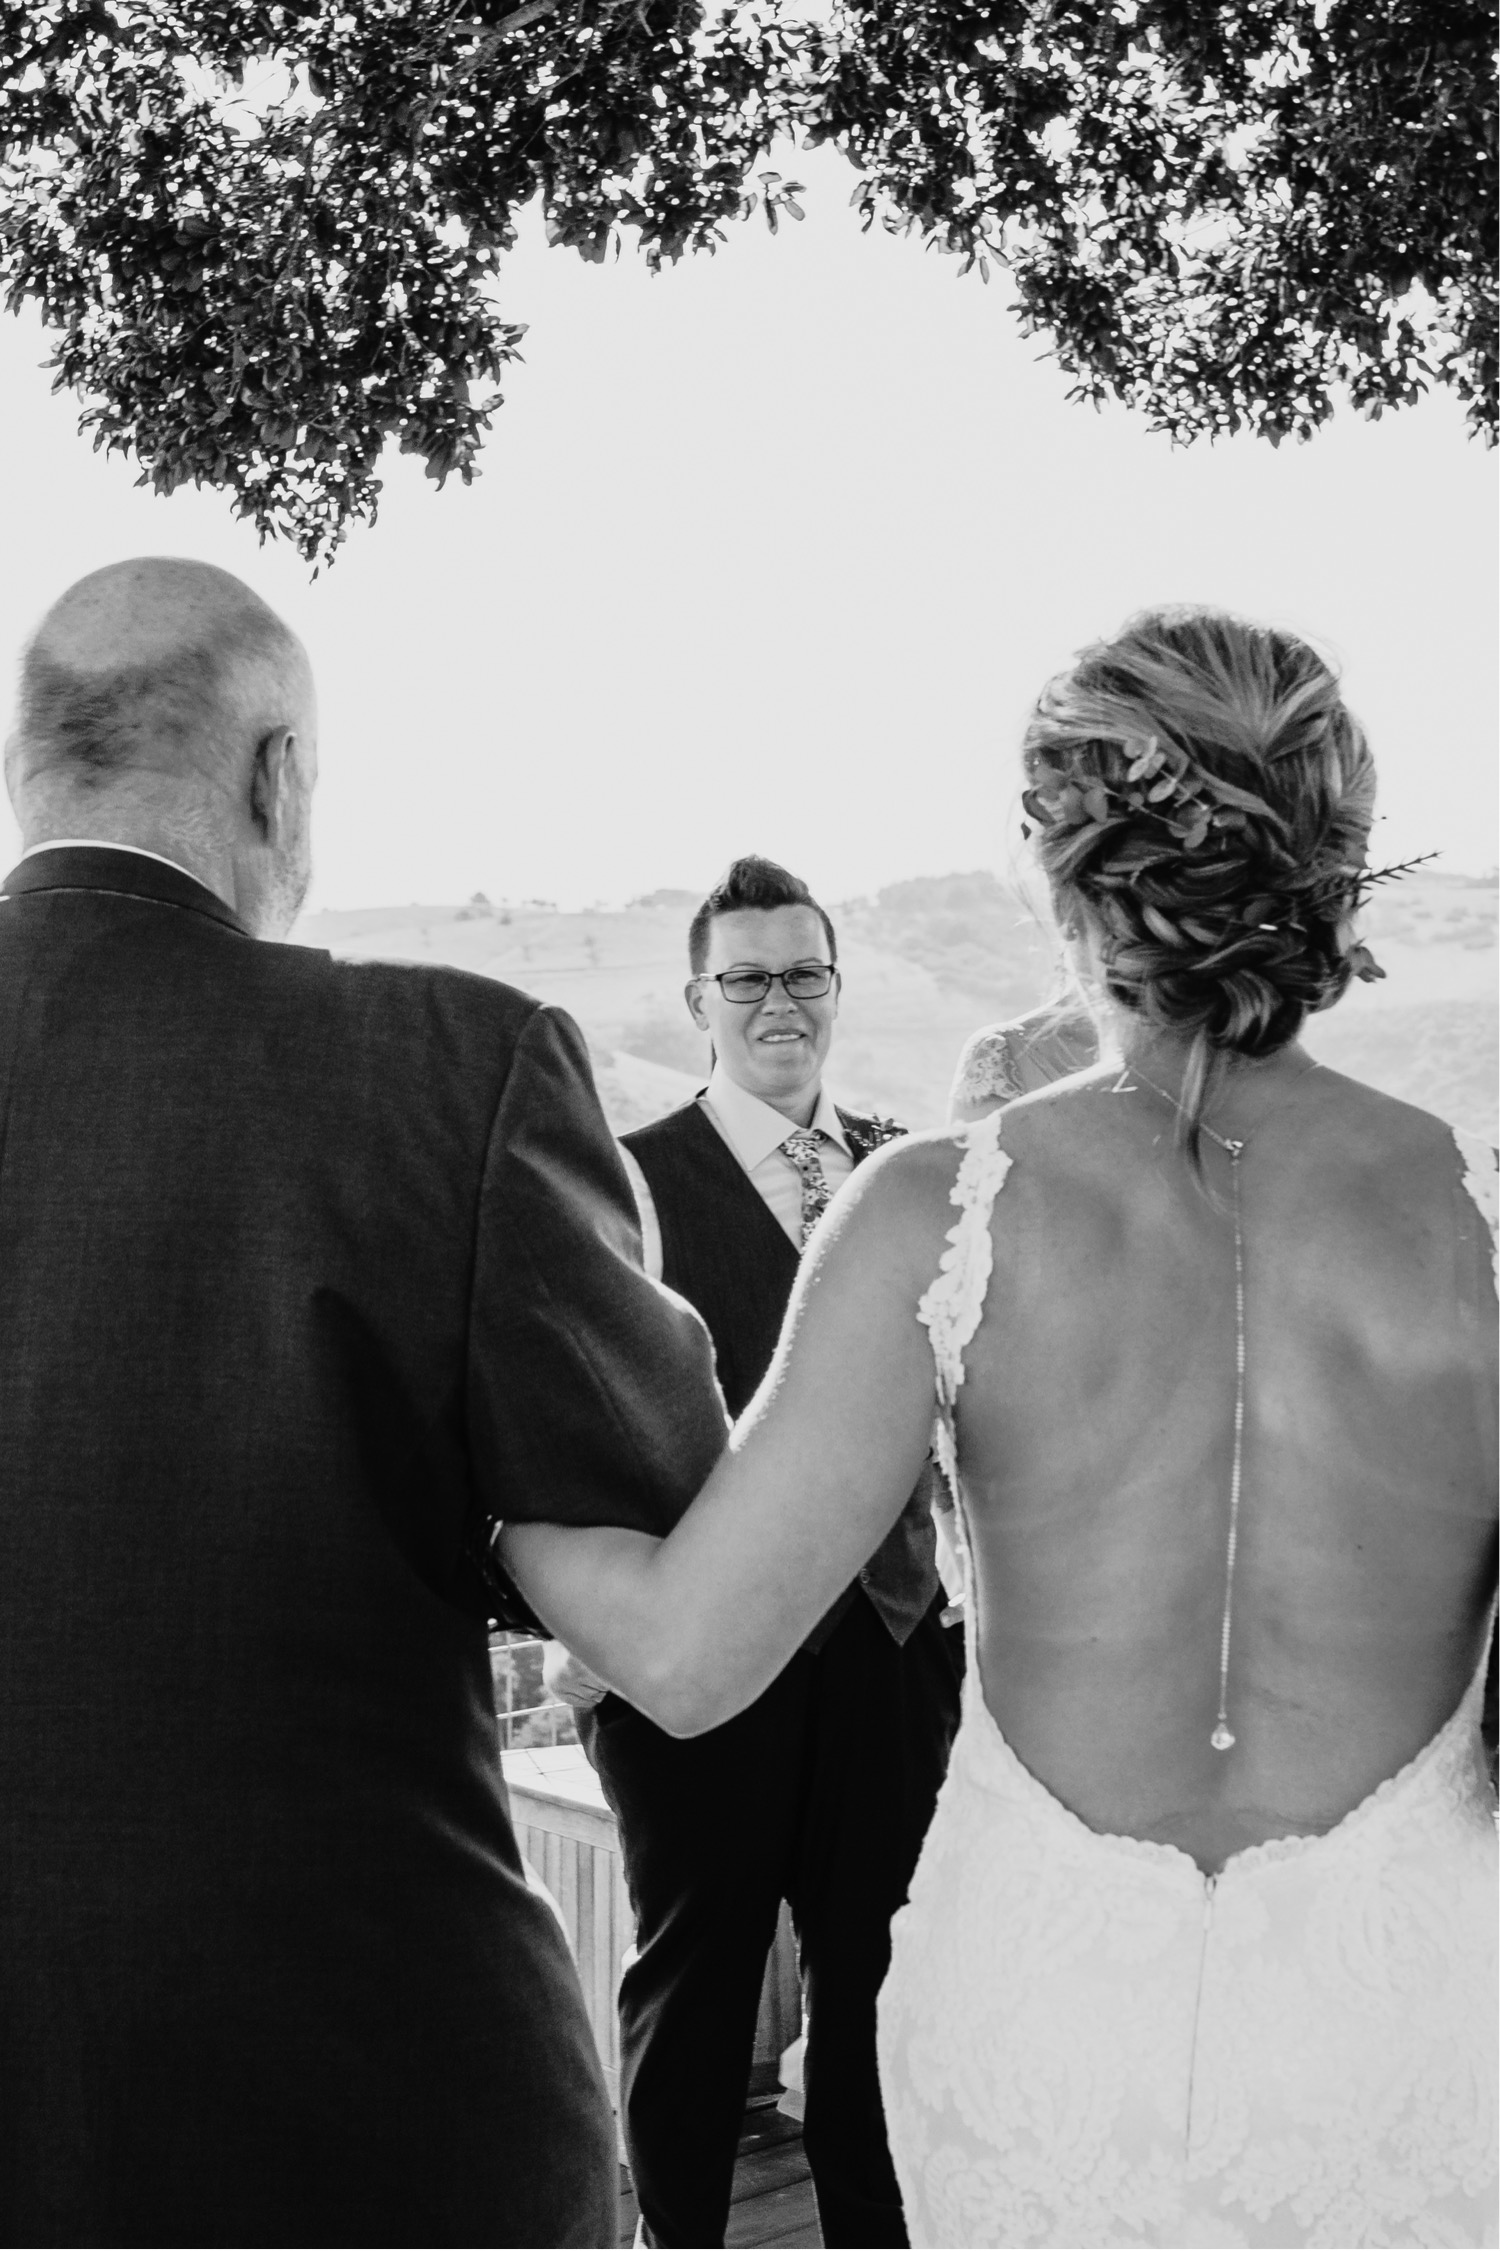 Father of the Bride leads the bride to the other bride as she smiles at them. Liz Koston Photography.